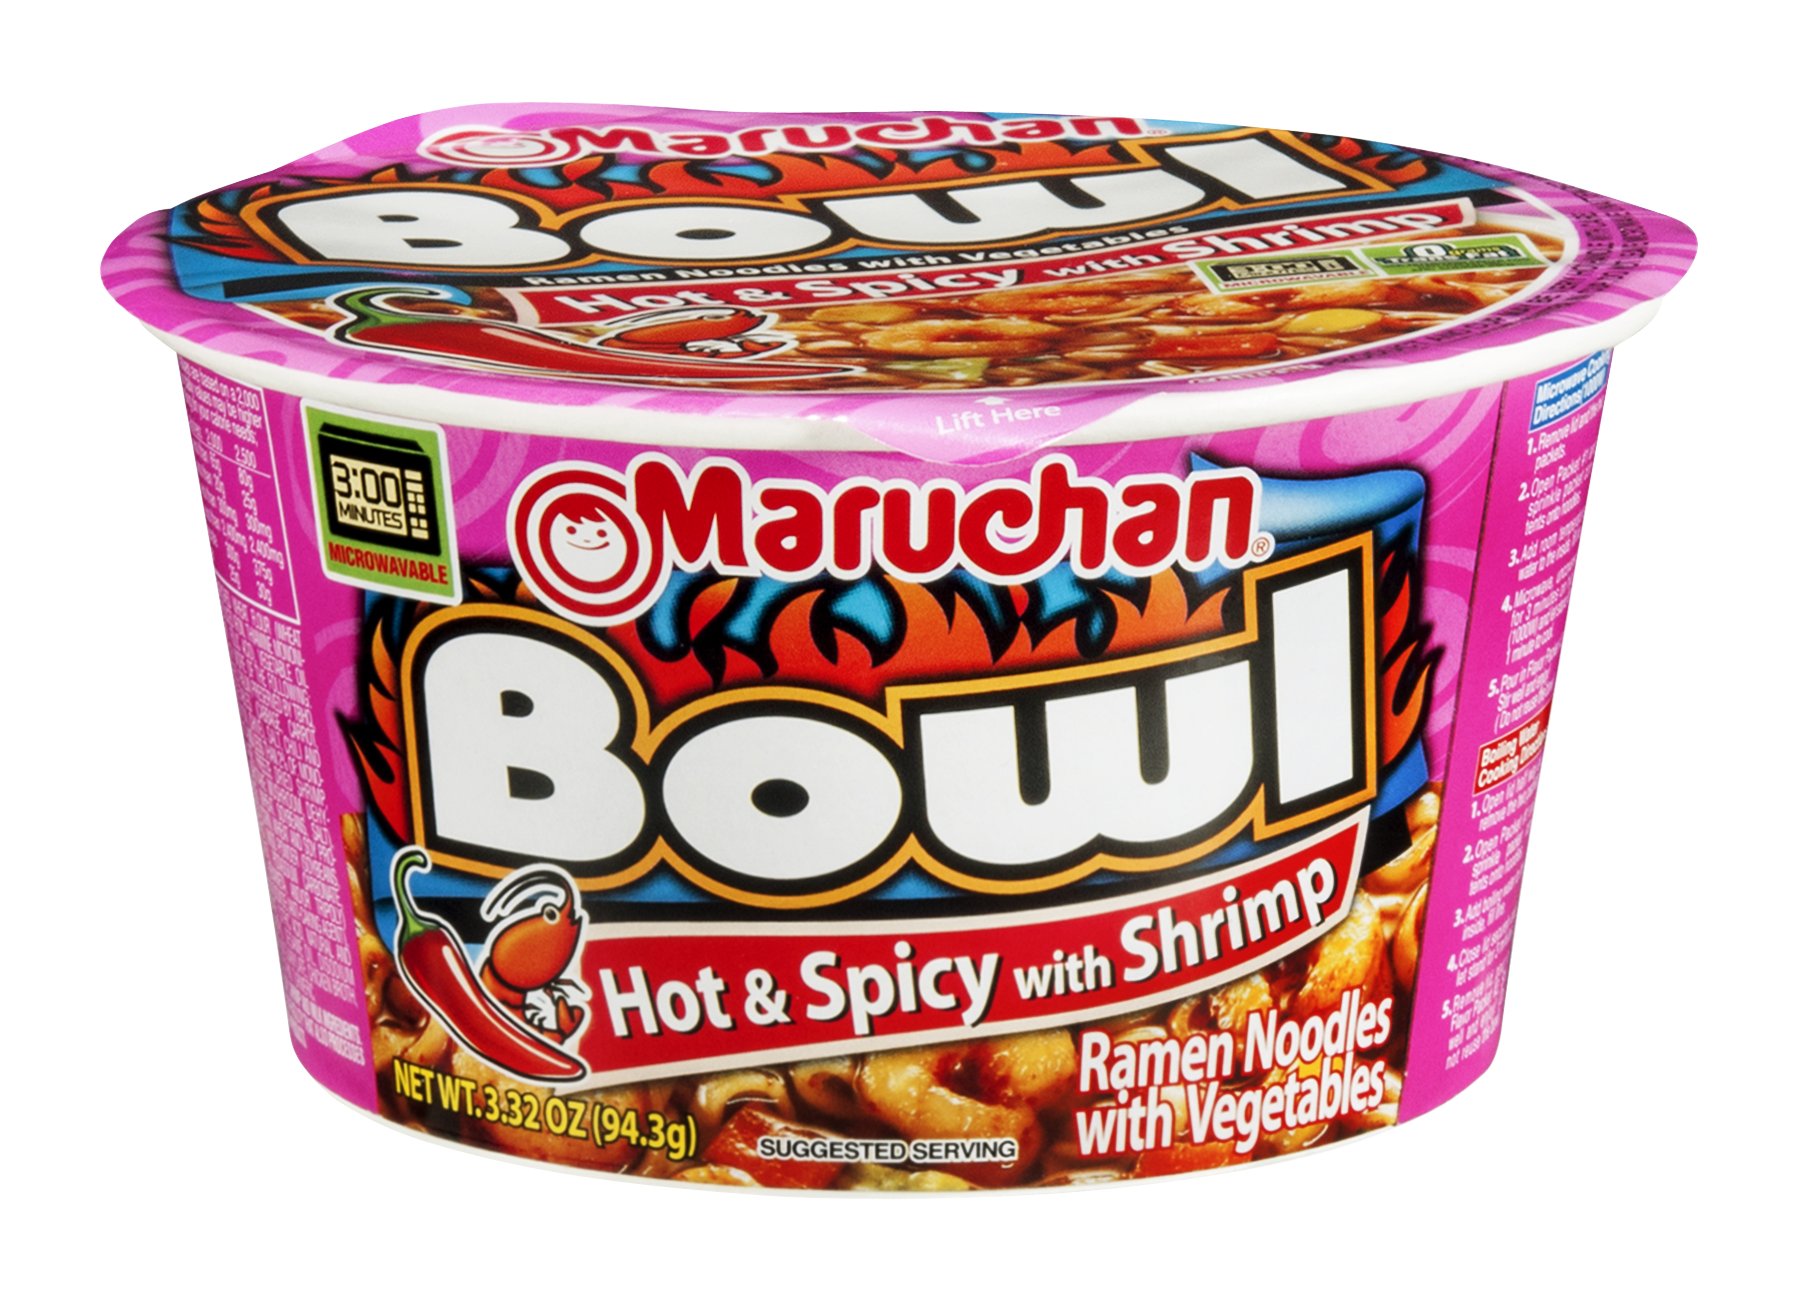 Maruchan Instant Bowl Hot and Spicy Shrimp Flavor - Shop Soups & Chili